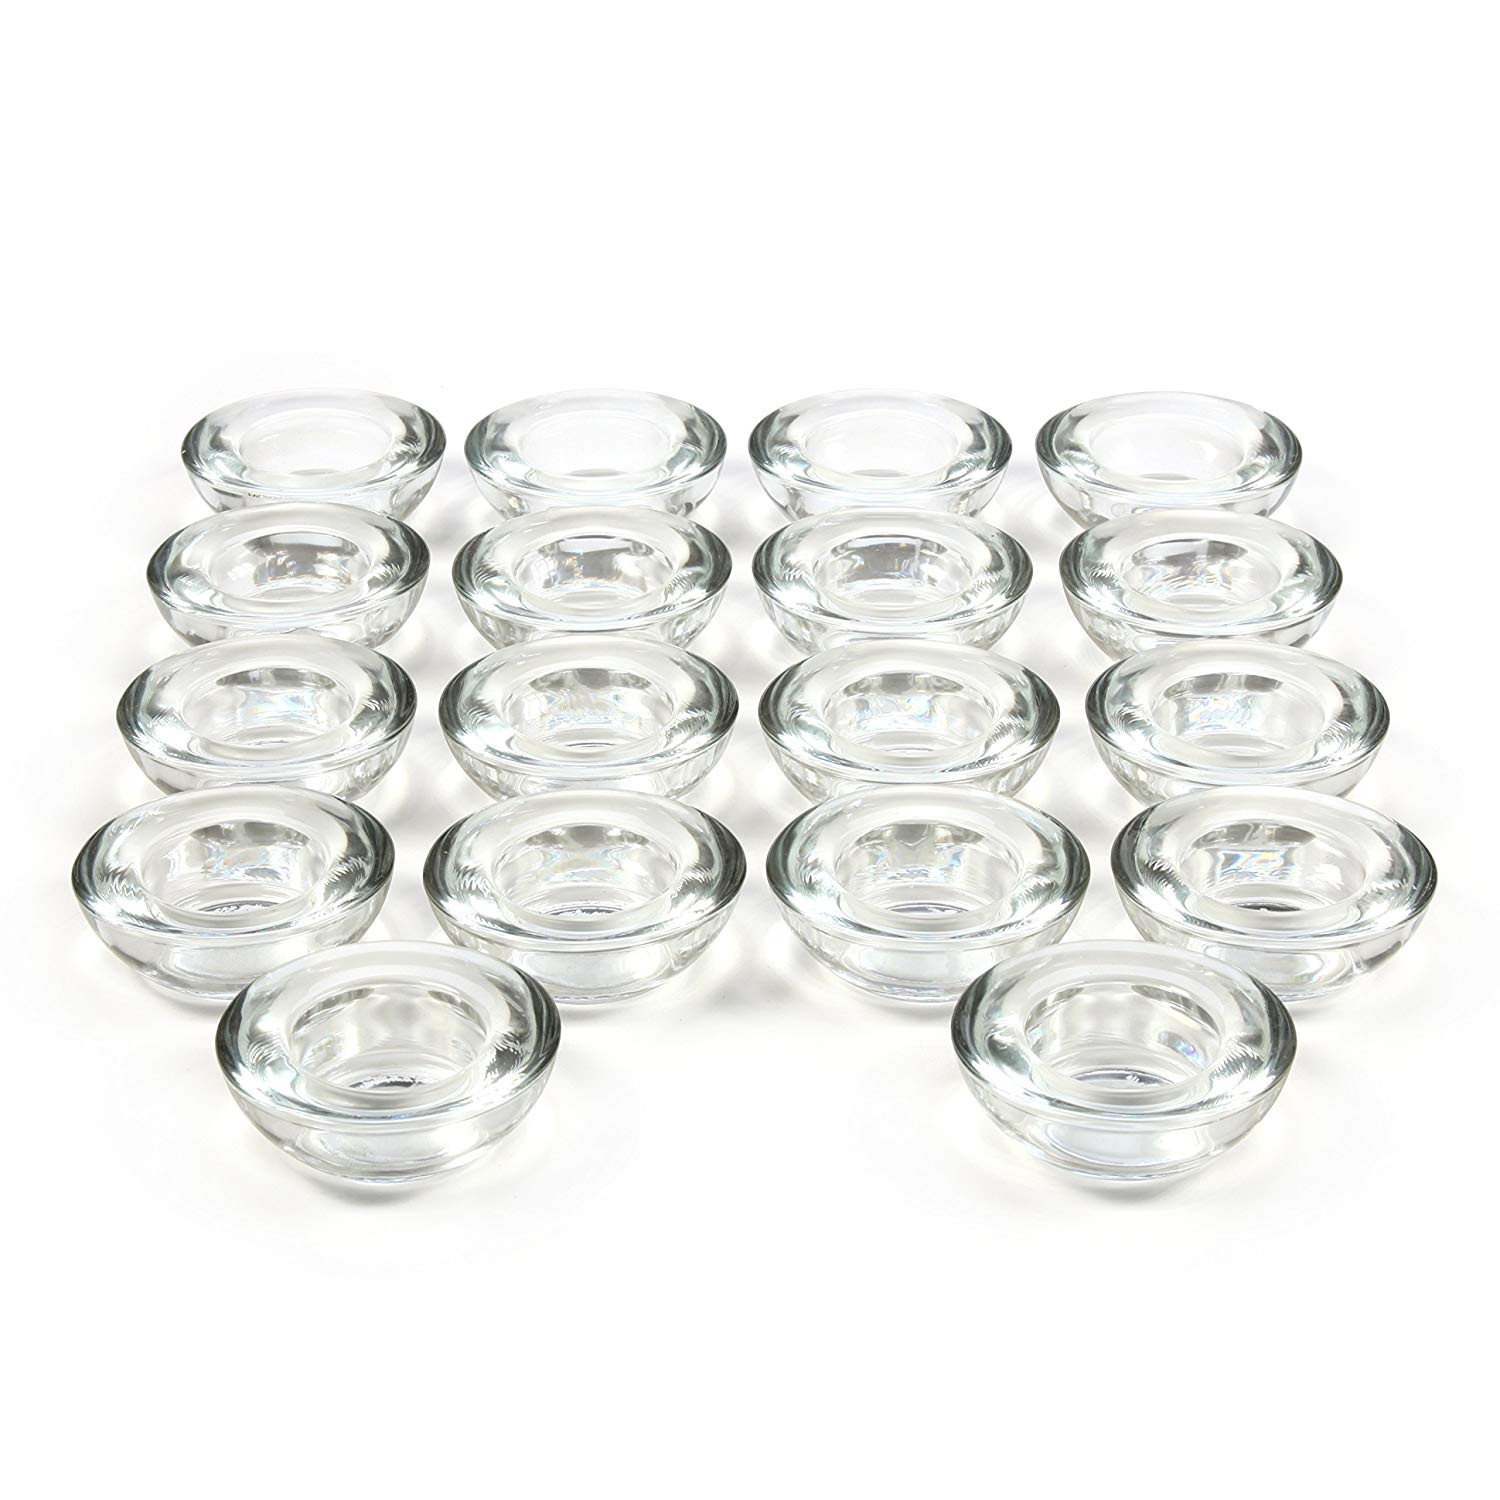 22 Elegant 18 Cylinder Vases wholesale 2024 free download 18 cylinder vases wholesale of amazon com hosley set of 18 clear glass led tea light holders 3 with amazon com hosley set of 18 clear glass led tea light holders 3 diameter ideal gift for we